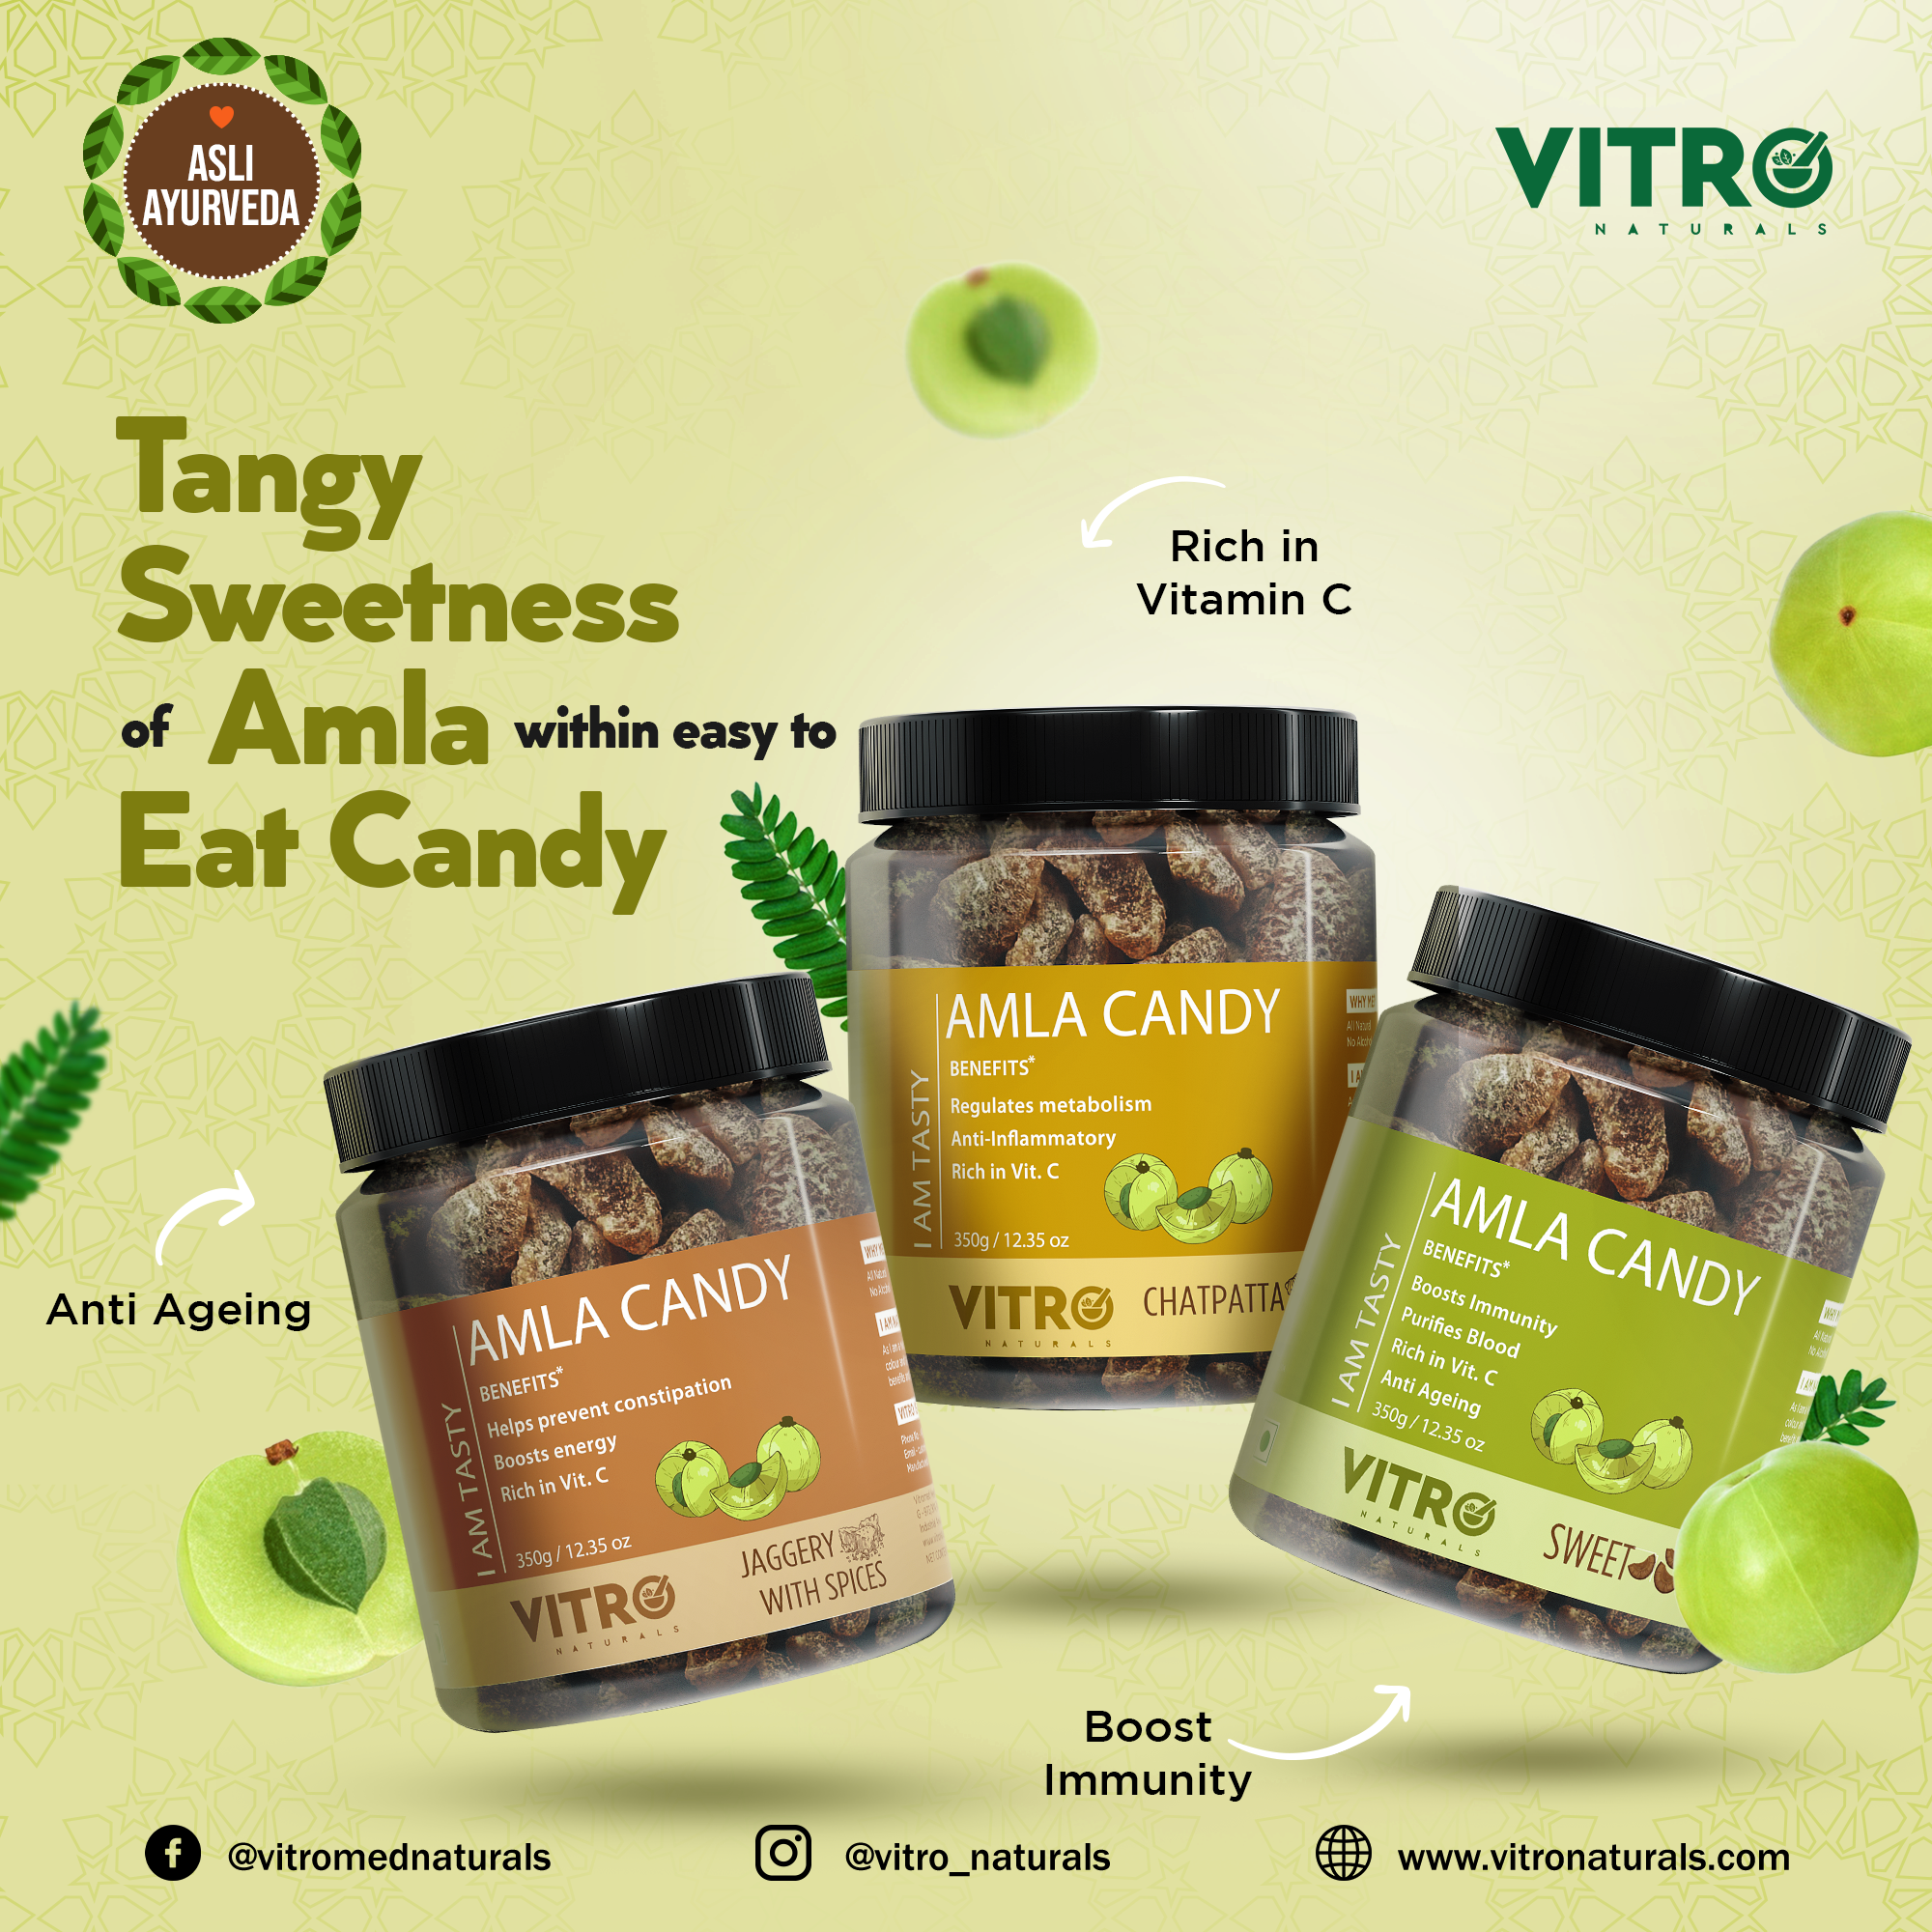 BUY 1 GET 1 FREE - AMLA CANDY CHATPATA DRY & JAGGERY WITH SPICES 350GM